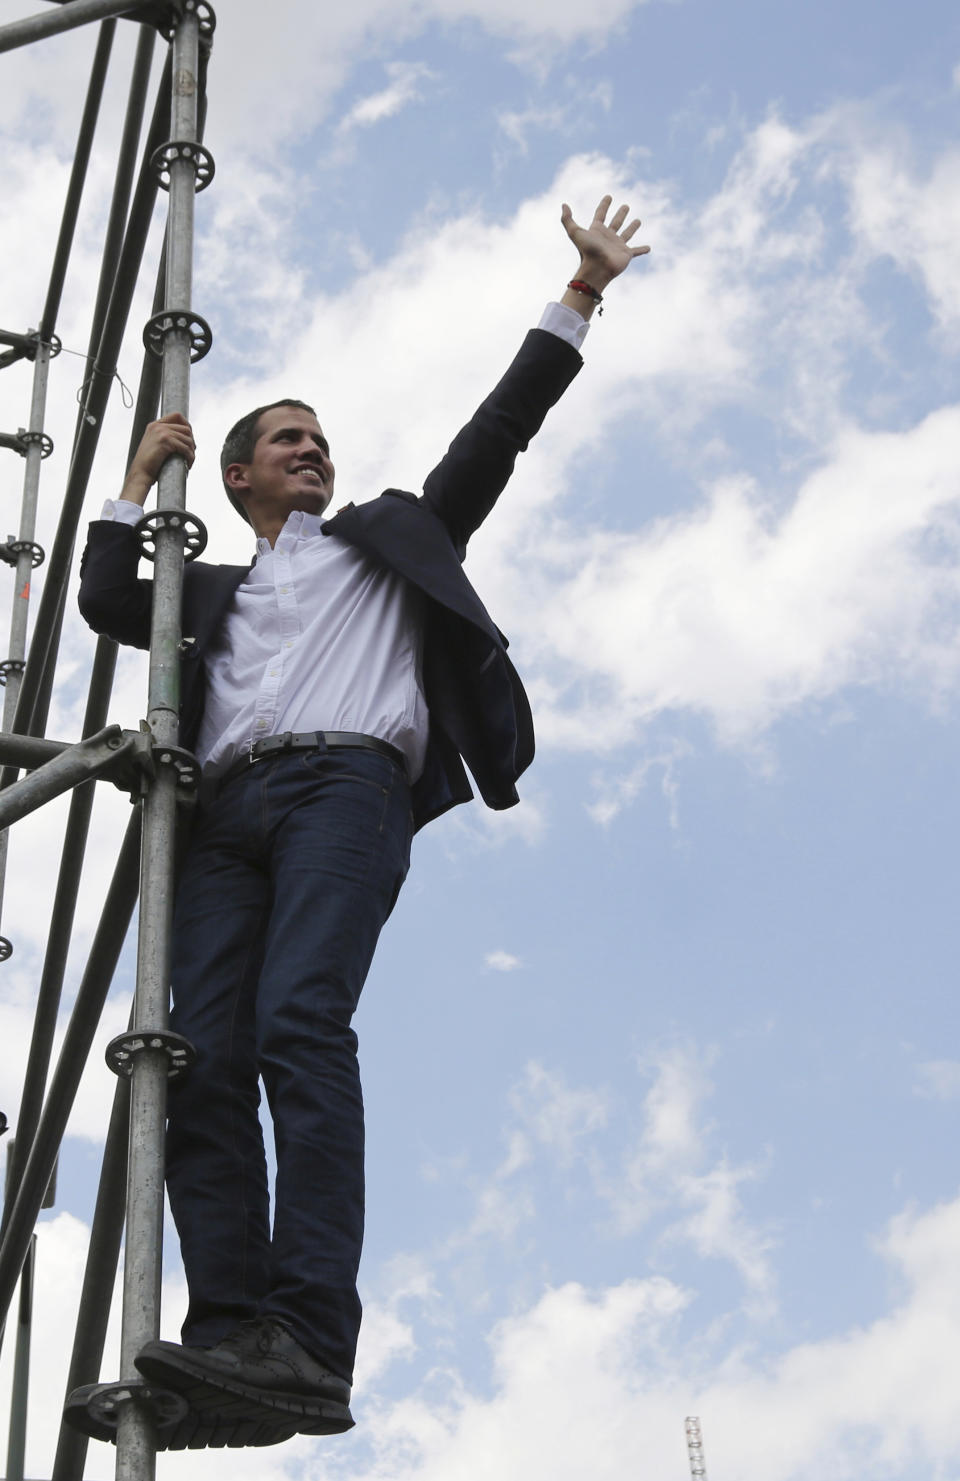 Venezuelan Congress President Juan Guaido, an opposition leader who declared himself interim president, waves to supporters from the stage's scaffolding after speaking to supporters during a rally demanding the resignation of Venezuelan President Nicolas Maduro in Caracas, Venezuela, Monday, March 4, 2019. The United States and about 50 other countries recognize Guaido as the rightful president of Venezuela, while Maduro says he is the target of a U.S.-backed coup plot. (AP Photo/Fernando Llano)